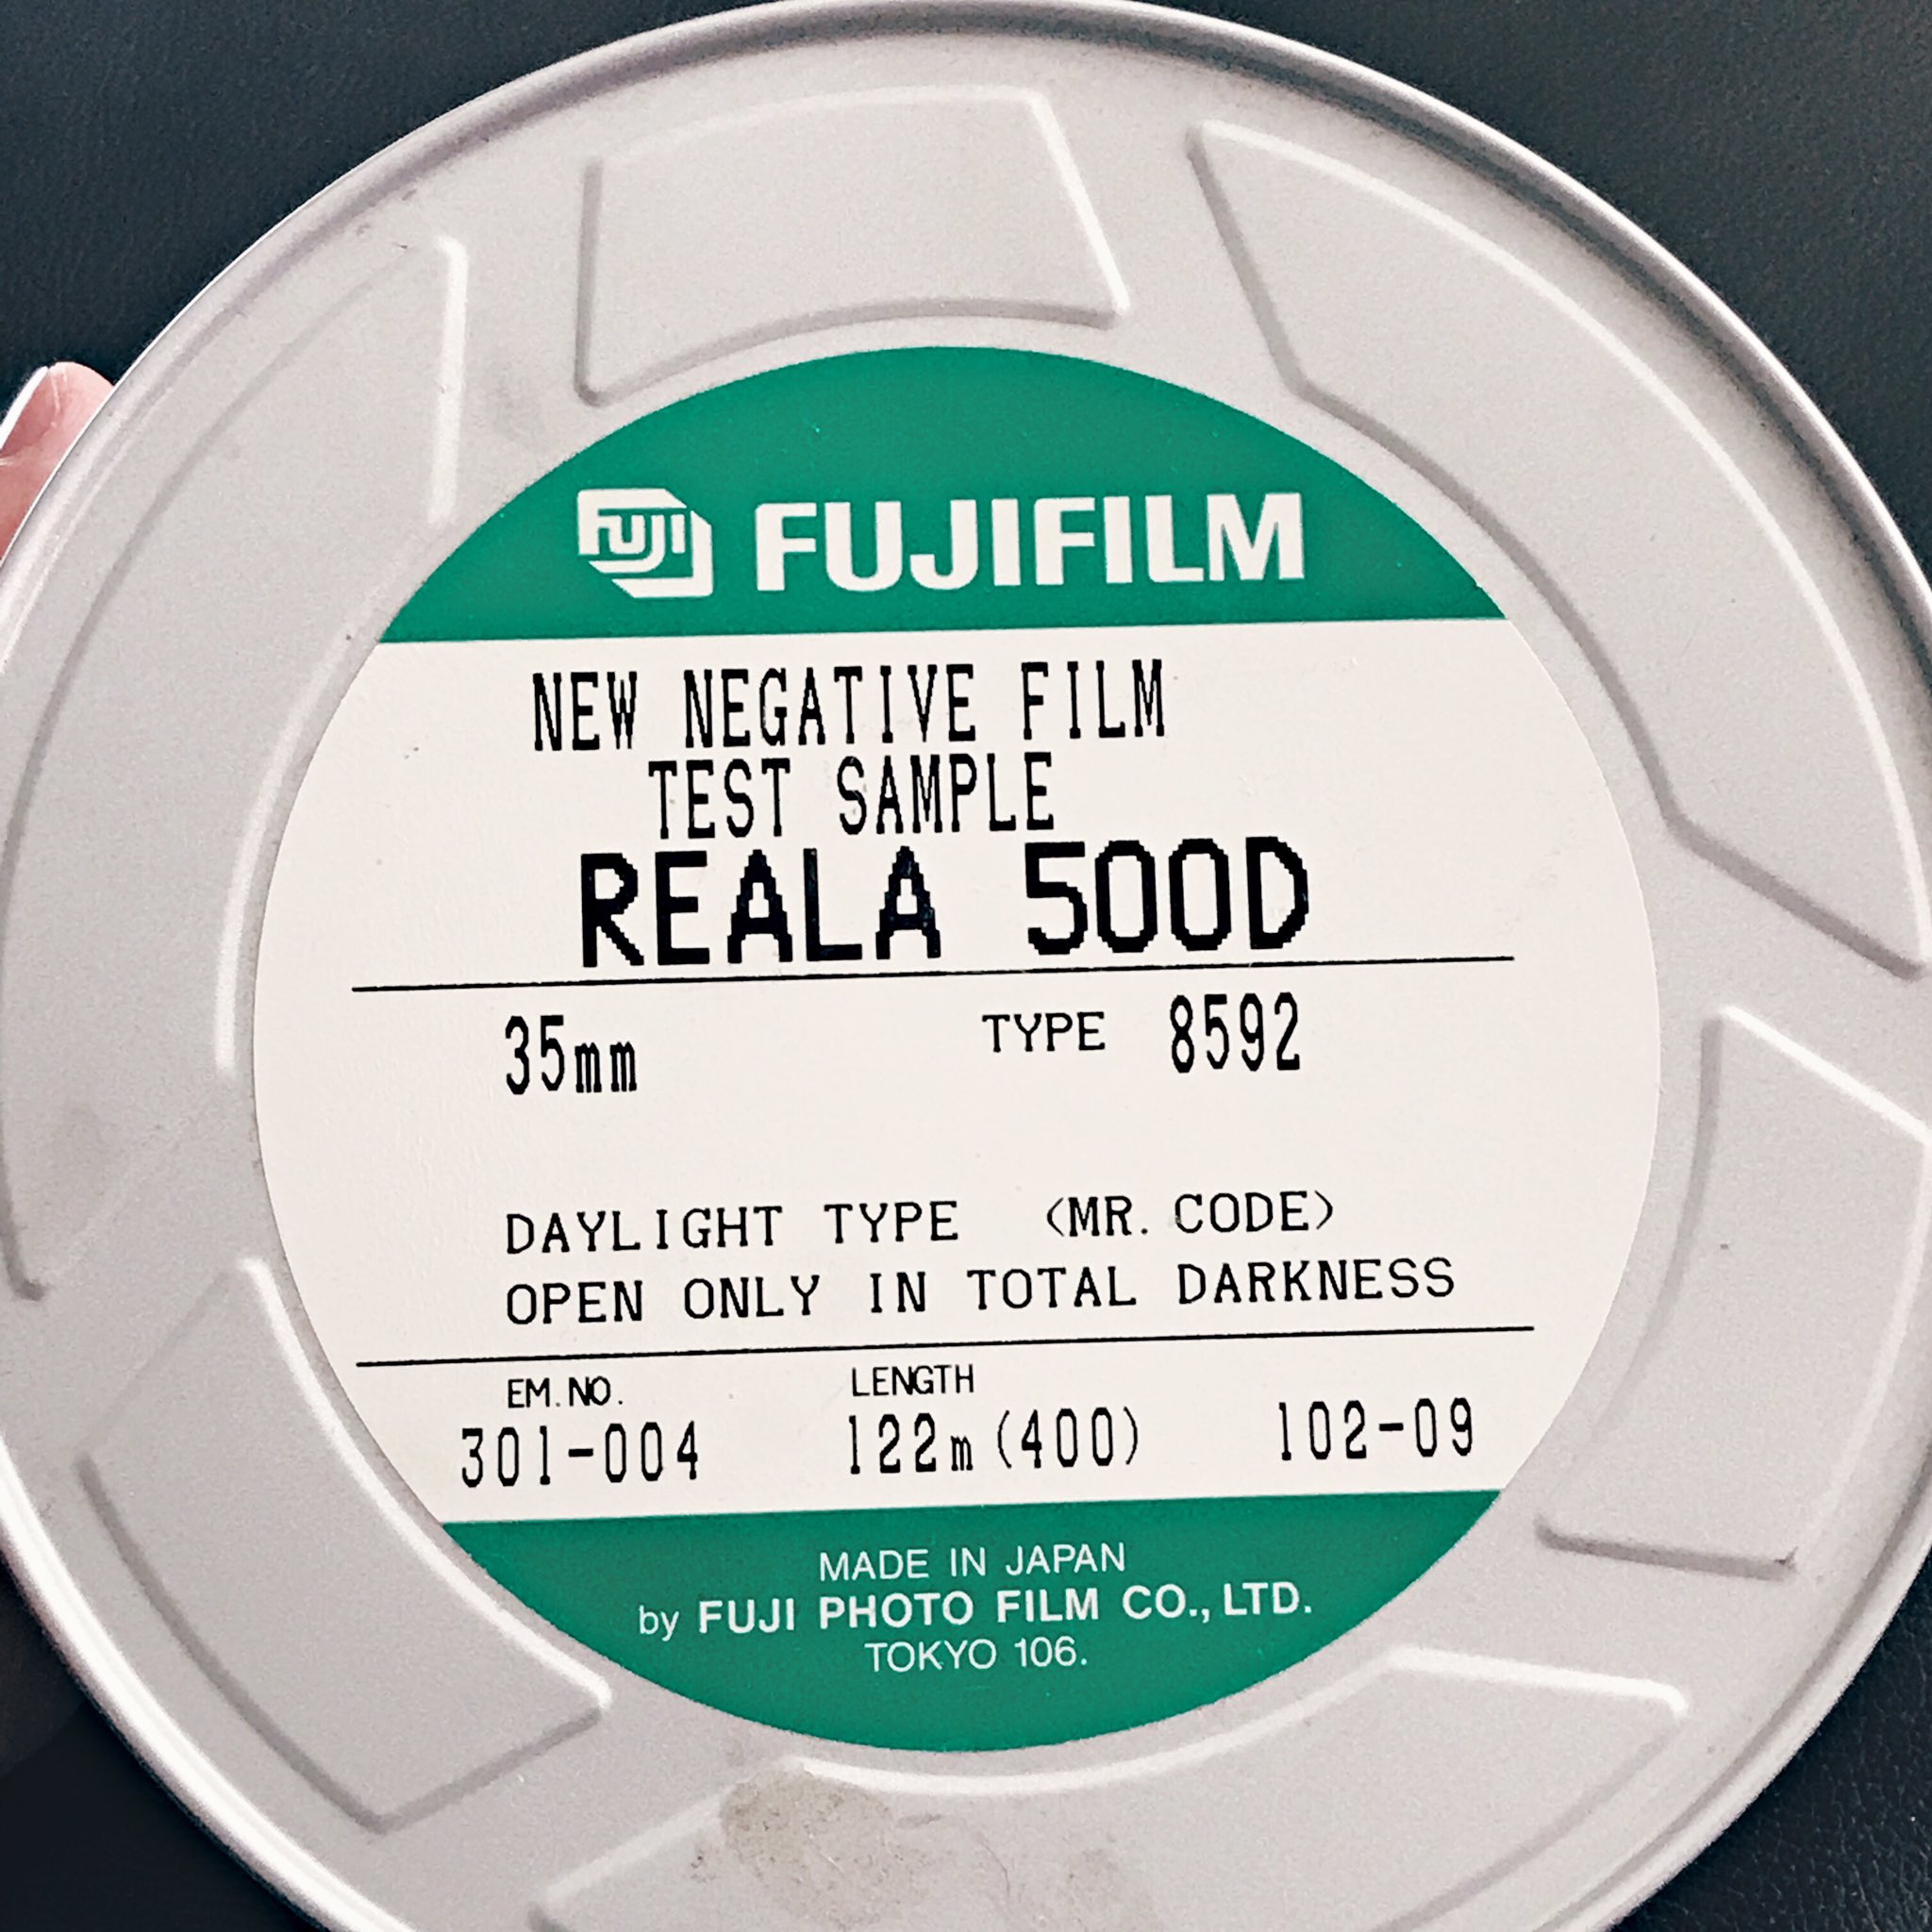 Just Kelly on X: My 400ft can of #Fujifilm Reala 500D #film came